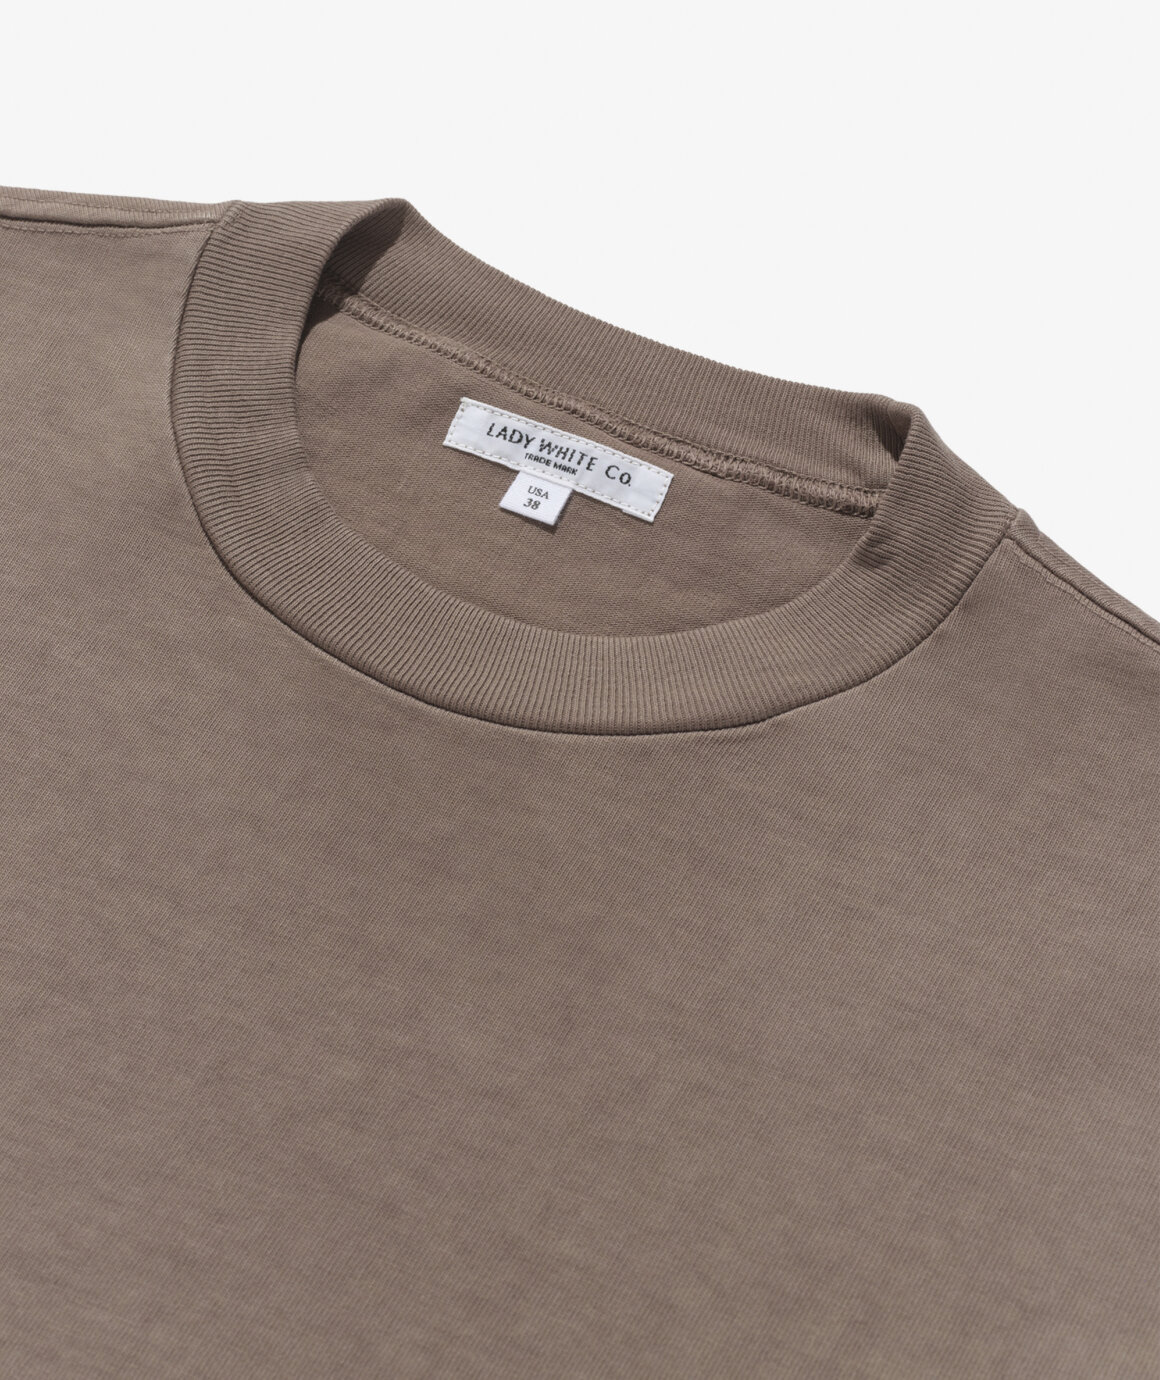 Norse Store | Shipping Worldwide - Lady White Co. Rugby T-Shirt - Taupe